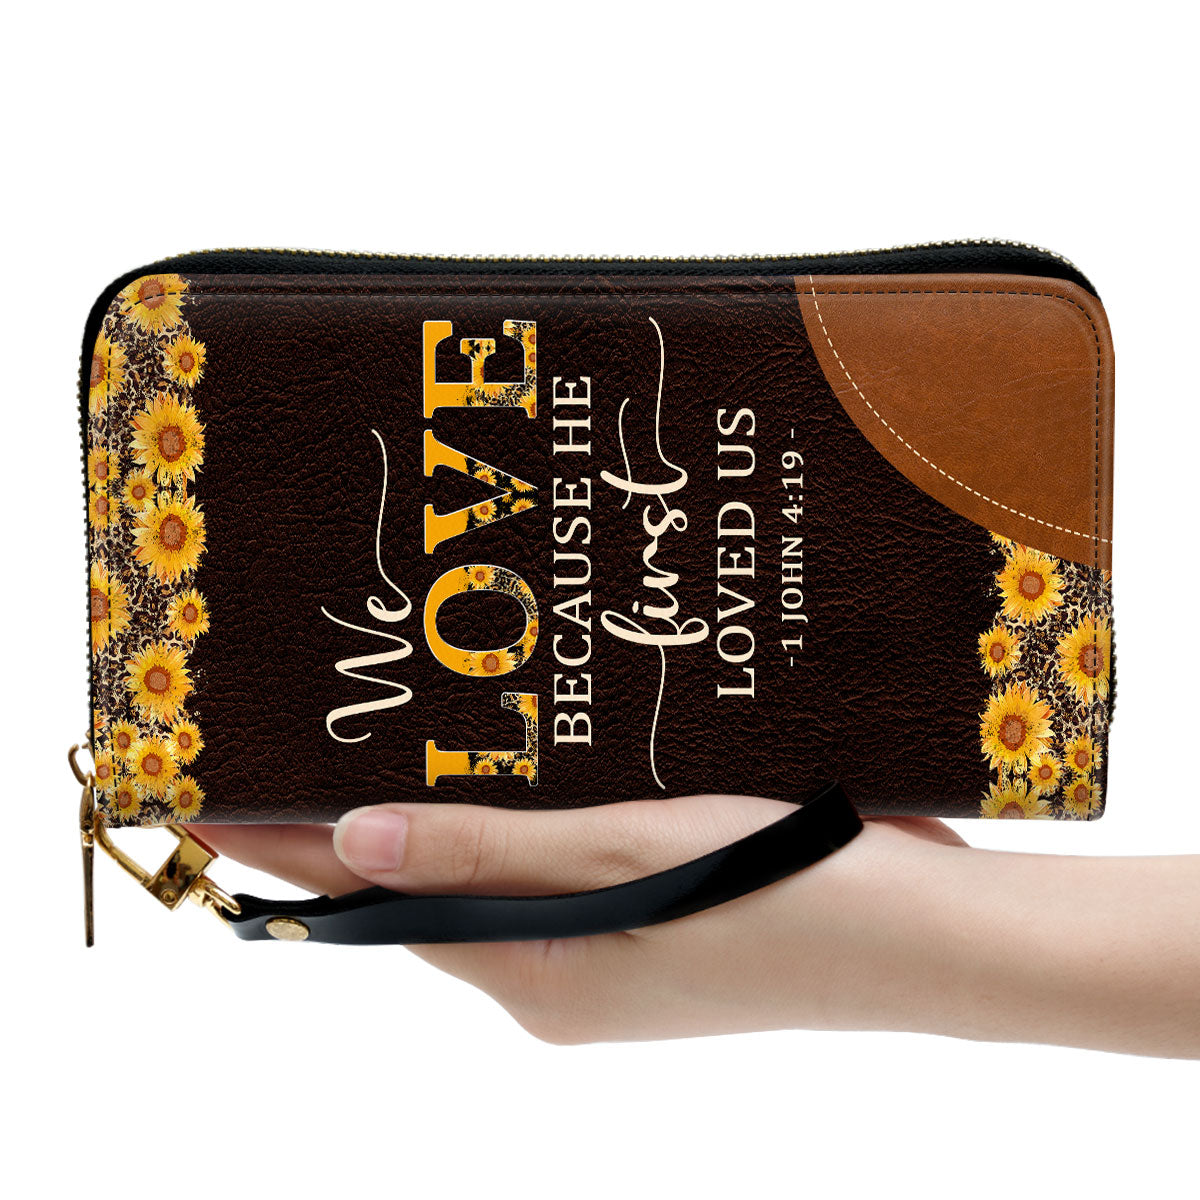 We Love Because He First Loved Us 1 John 4 19 Clutch Purse For Women - Personalized Name - Christian Gifts For Women